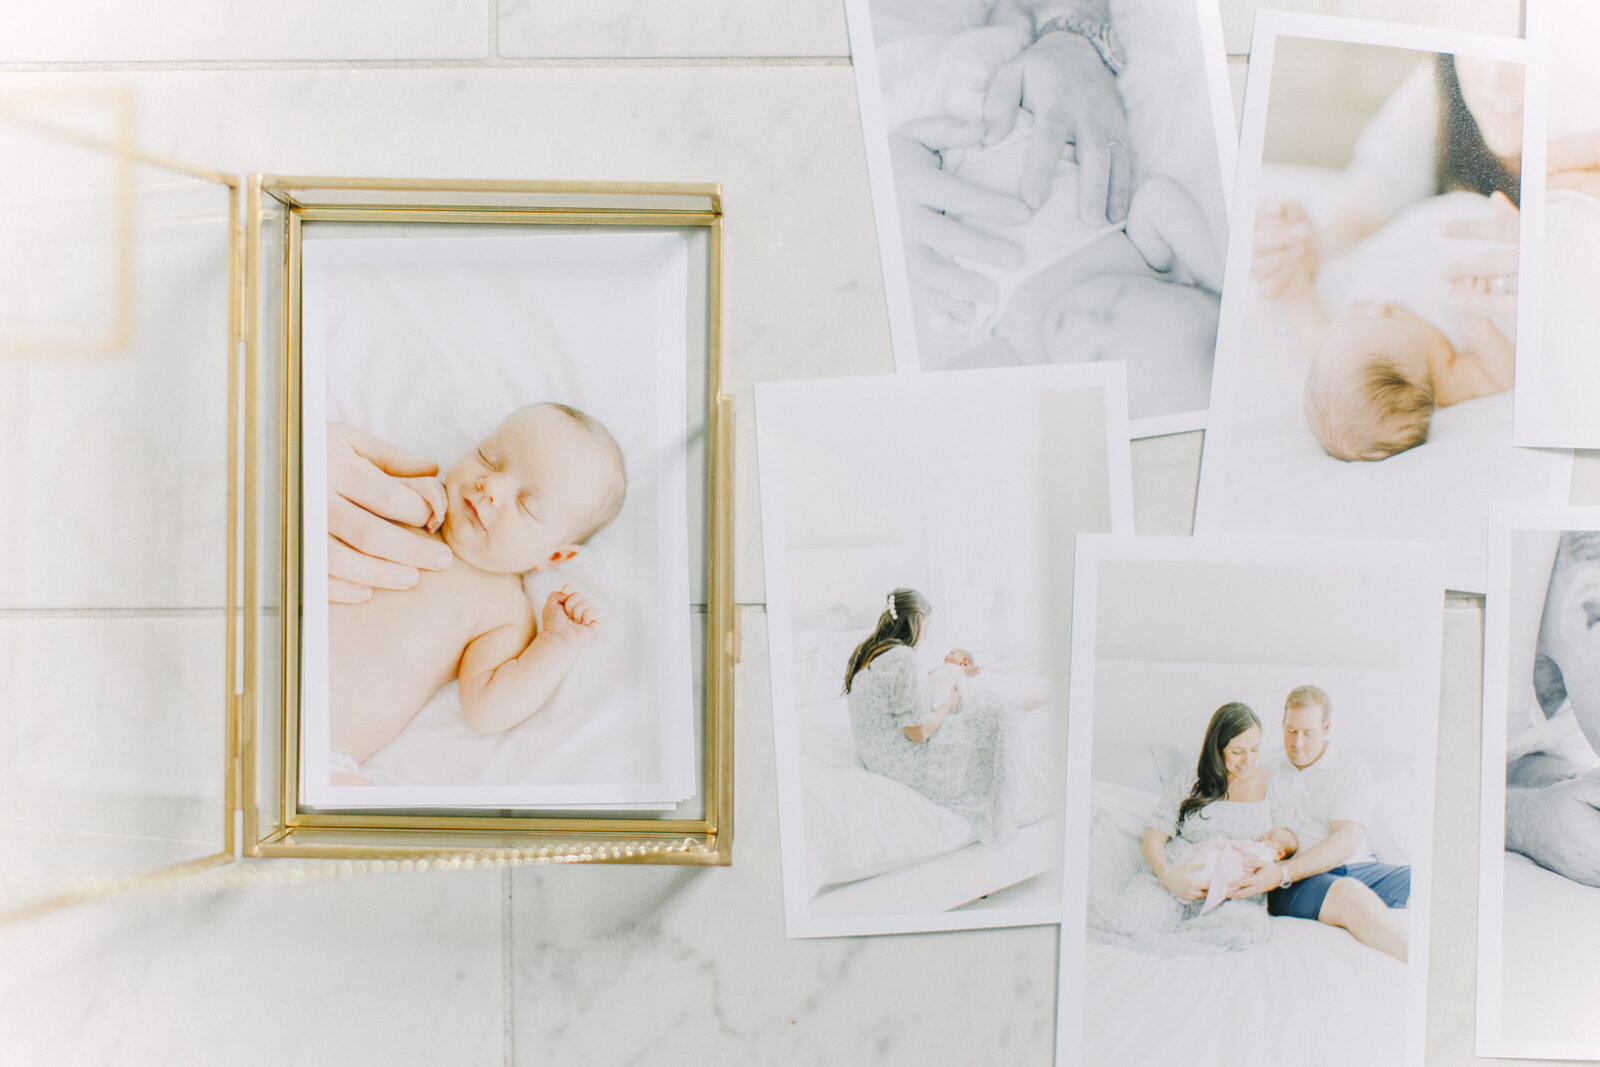 A flatlay photo of a loose pile of 4x6 printed images next to a glass box with brass accents